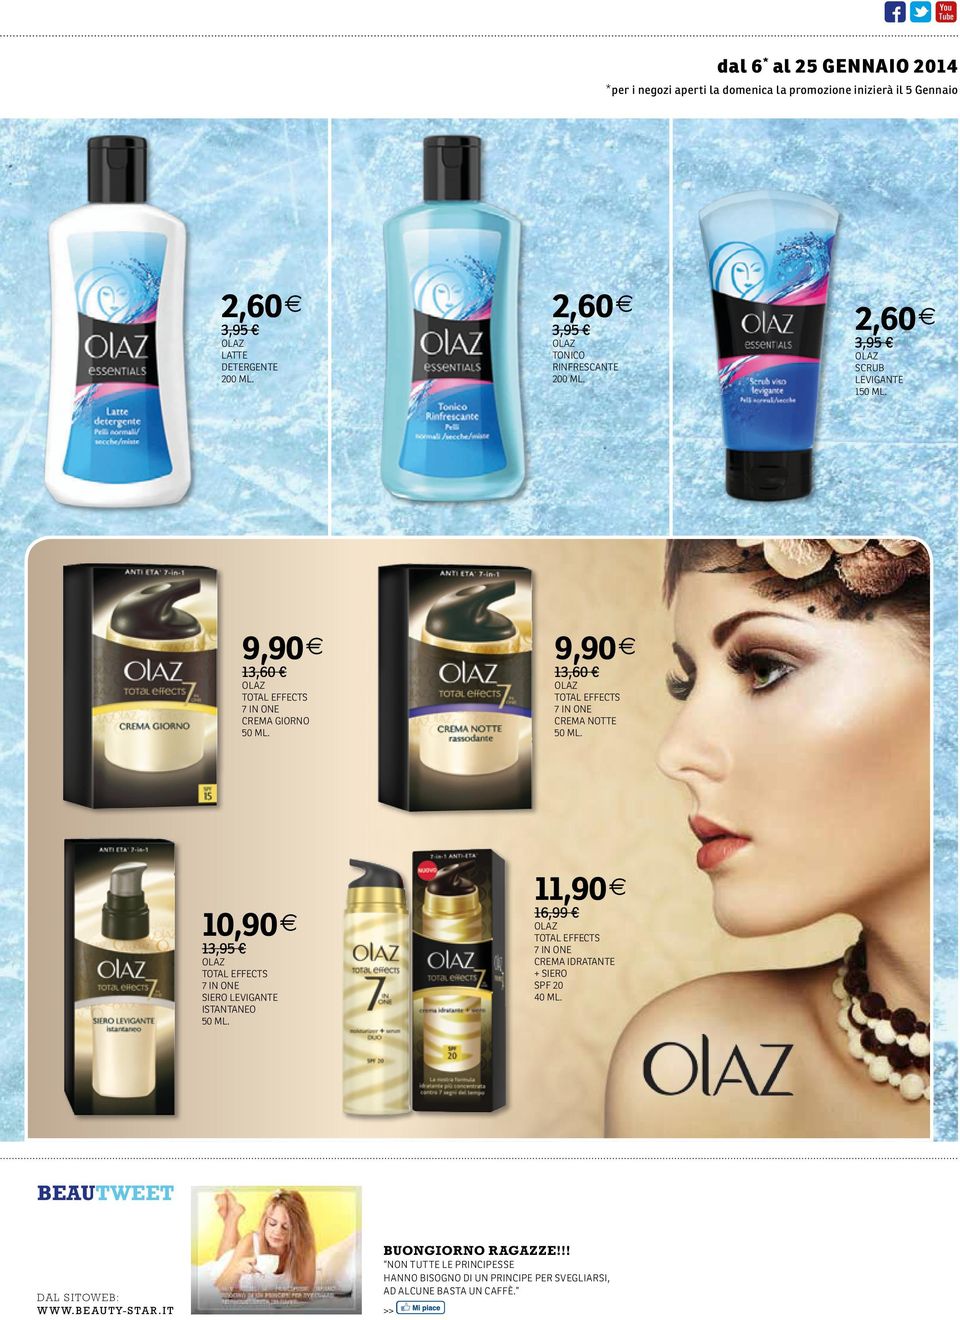 9,90 13,60 TOTAL EFFECTS 7 IN ONE CREMA NOTTE 50 ML. 10,90 13,95 TOTAL EFFECTS 7 IN ONE SIERO LEVIGANTE ISTANTANEO 50 ML.